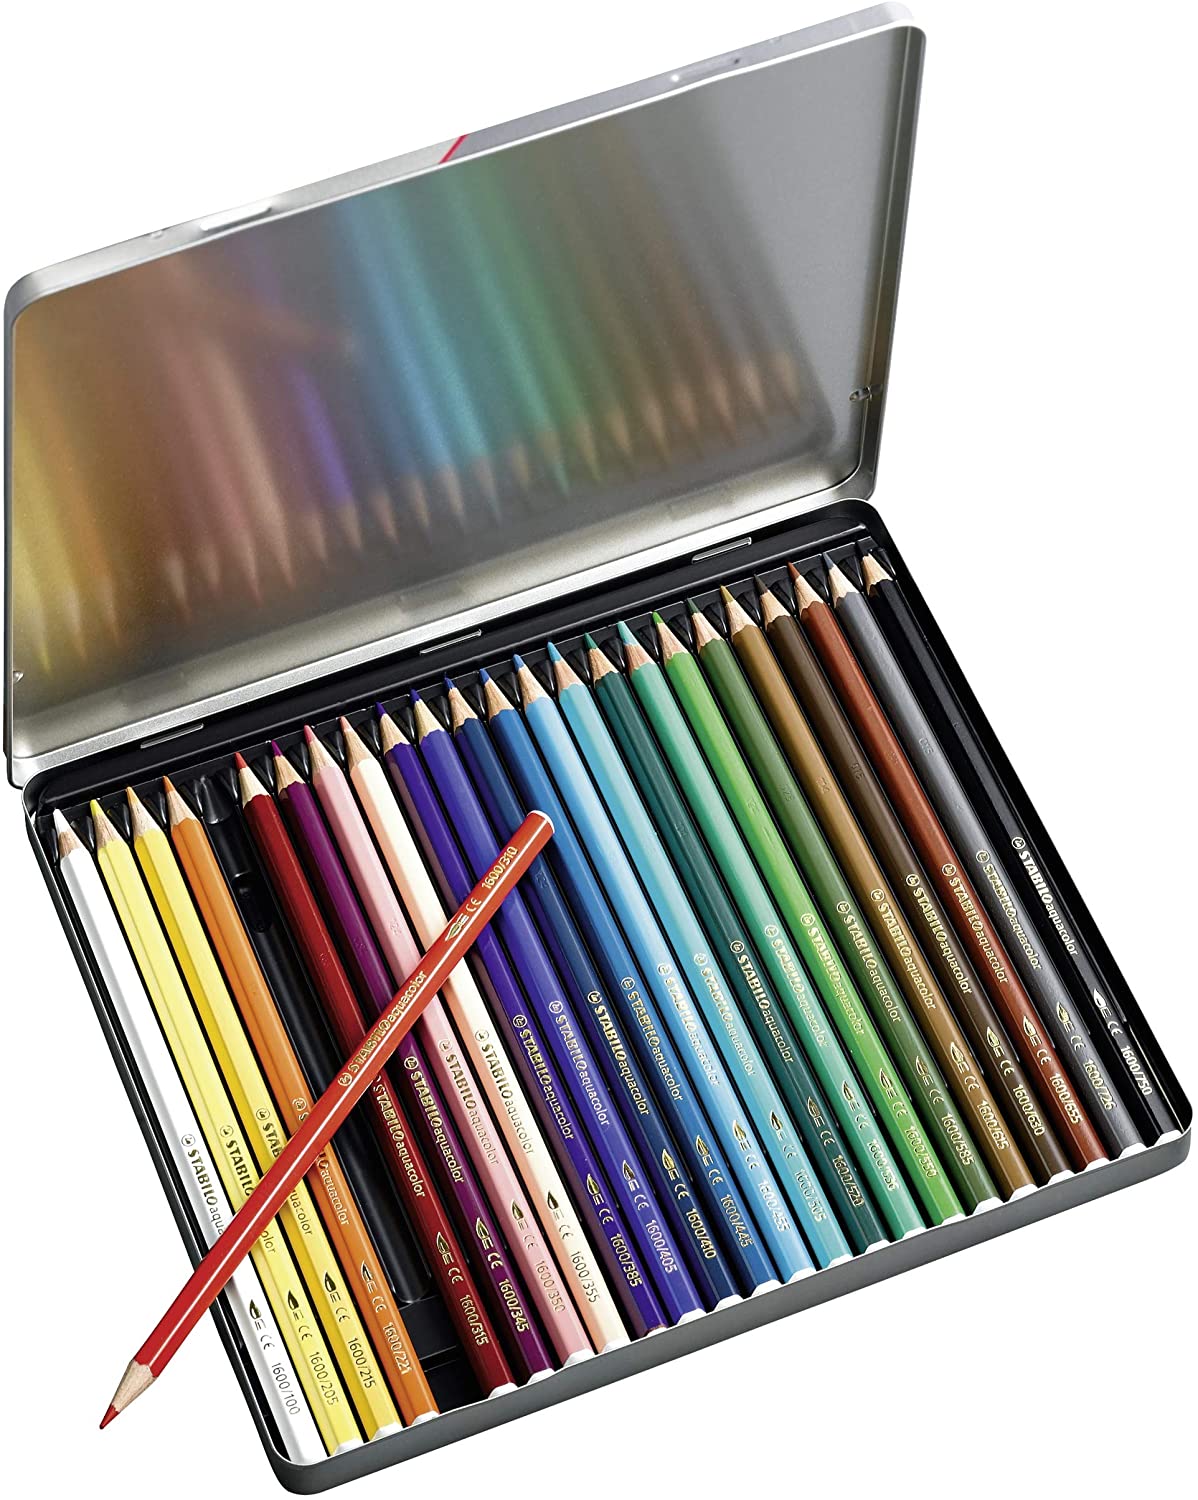  Pack 24 Crayons Stabilo Aquacolor 2,8 mm